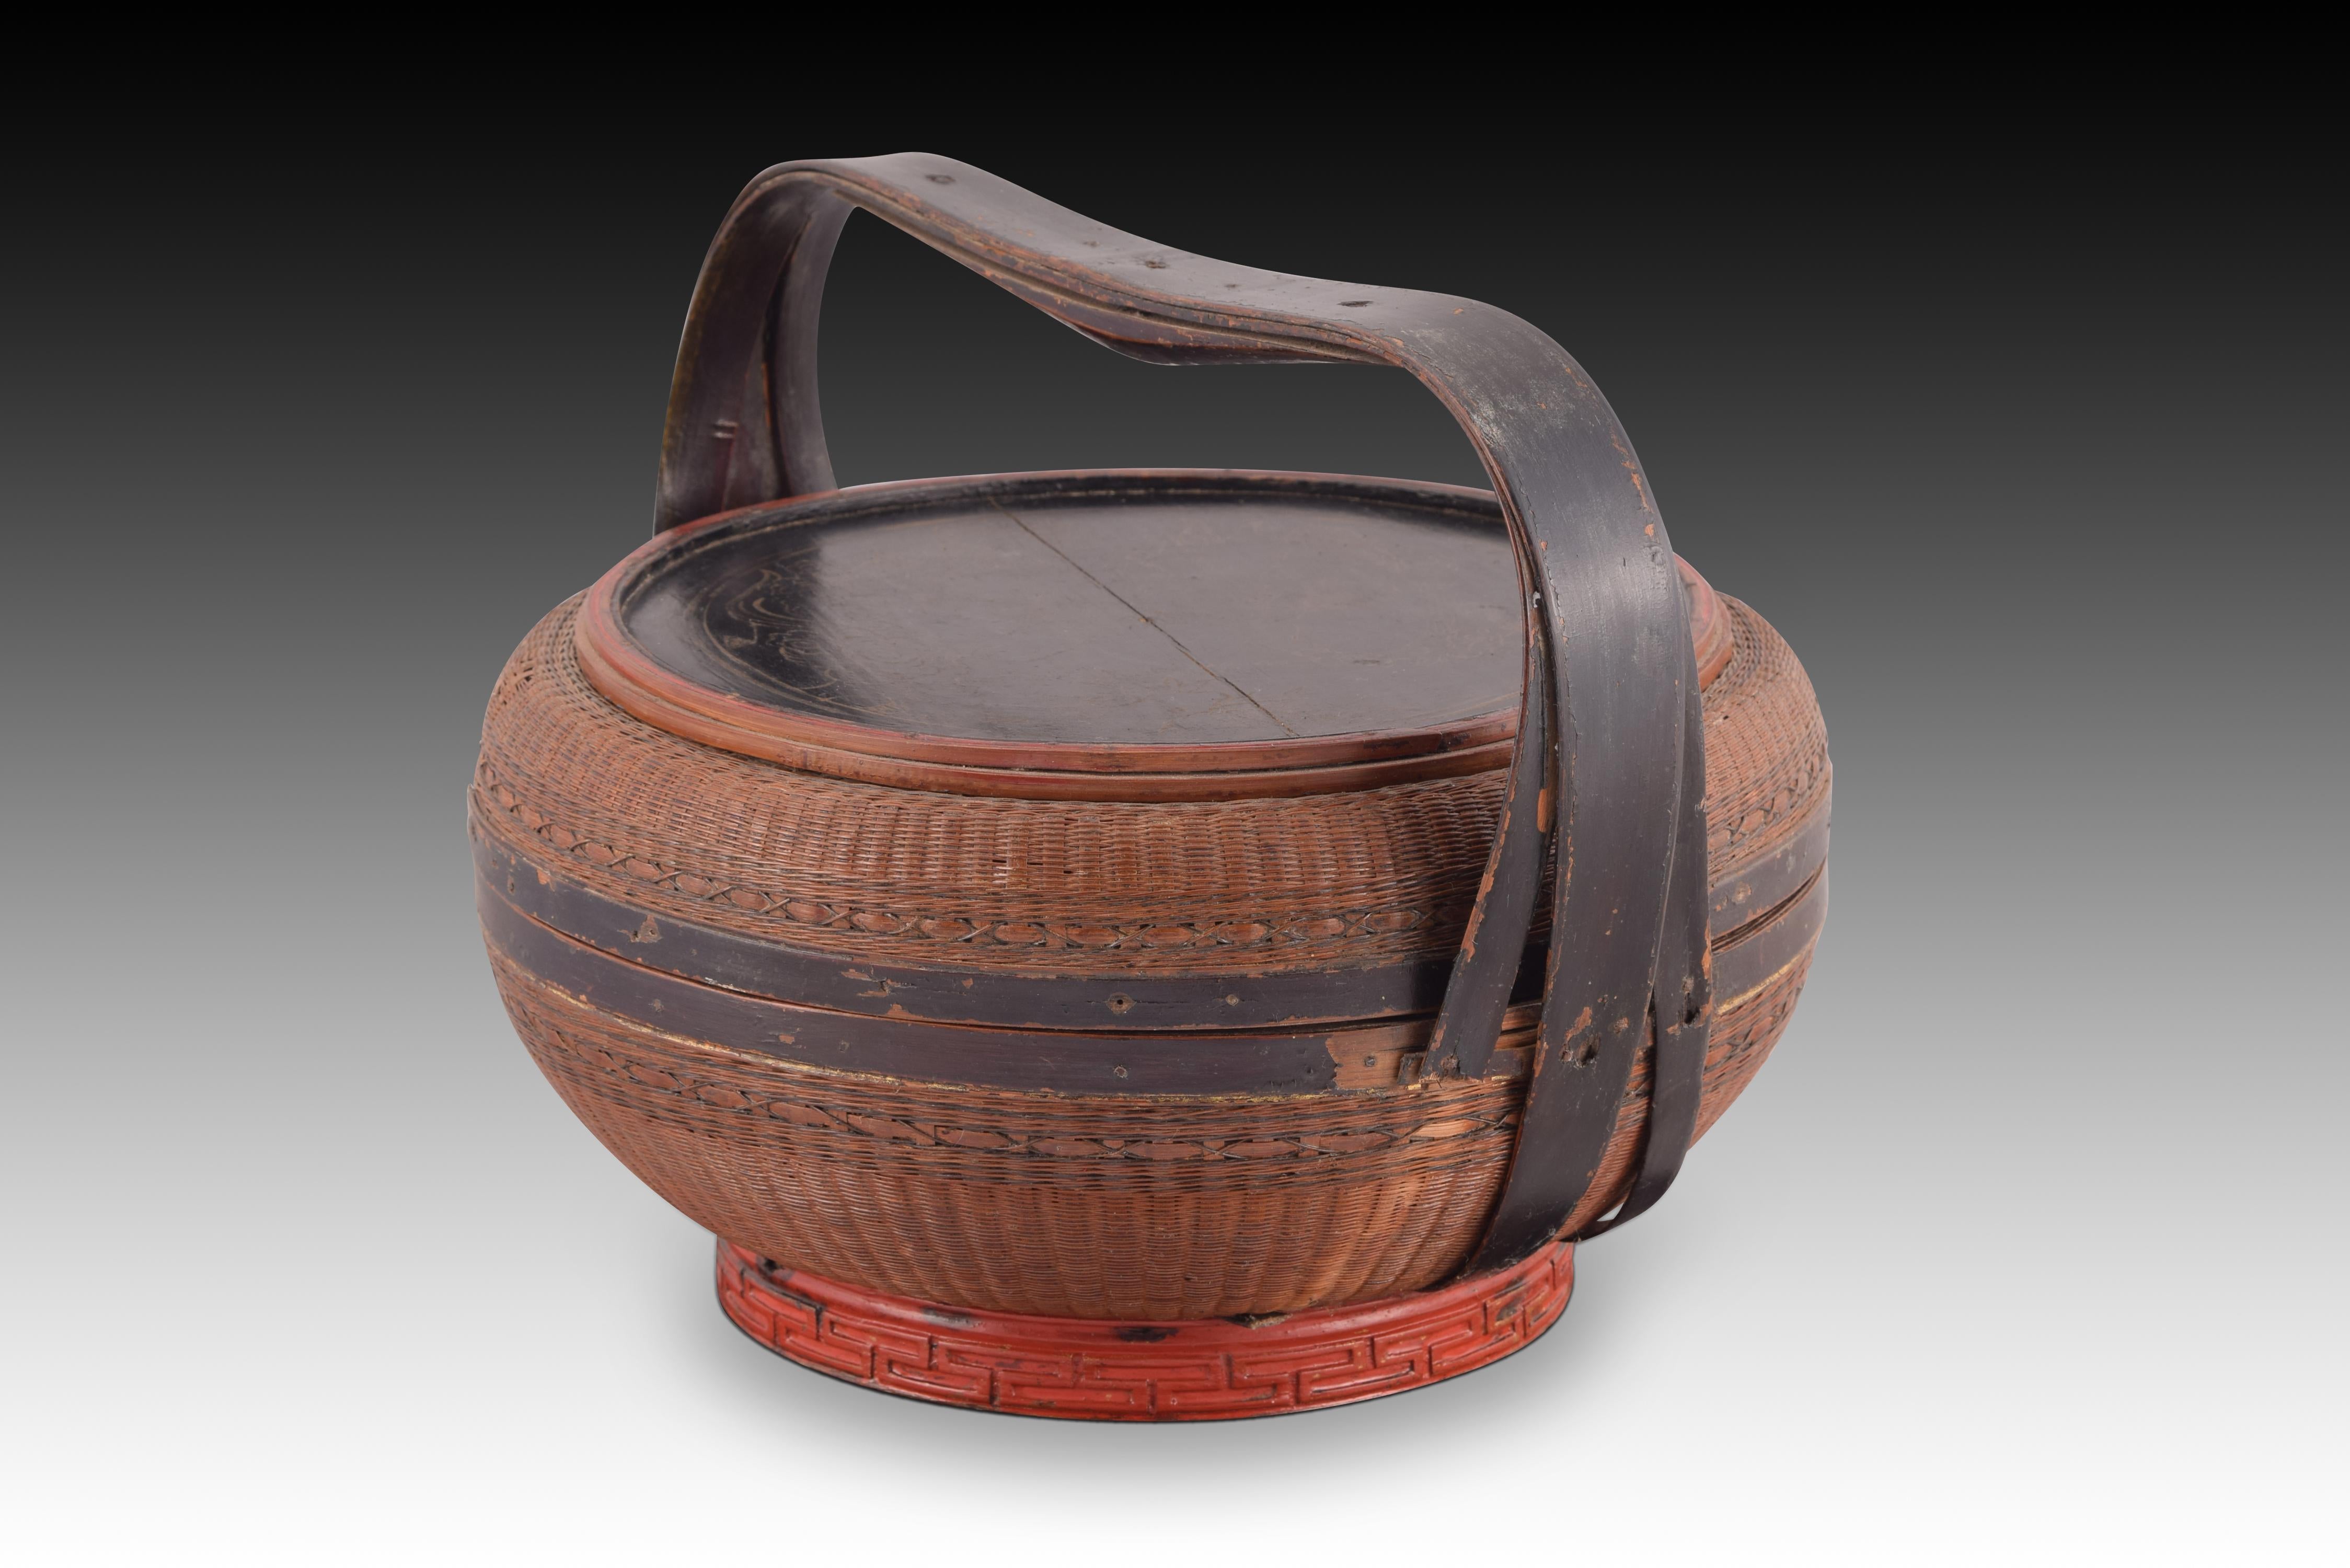 Handmade basket. Vegetable fiber and lacquered wood. China, towards the beginning of the 20th century. 
Chinese basket with a flattened ovoid shape that combines meticulous and complex basketry work on the body with lid, mouthpieces, handles and